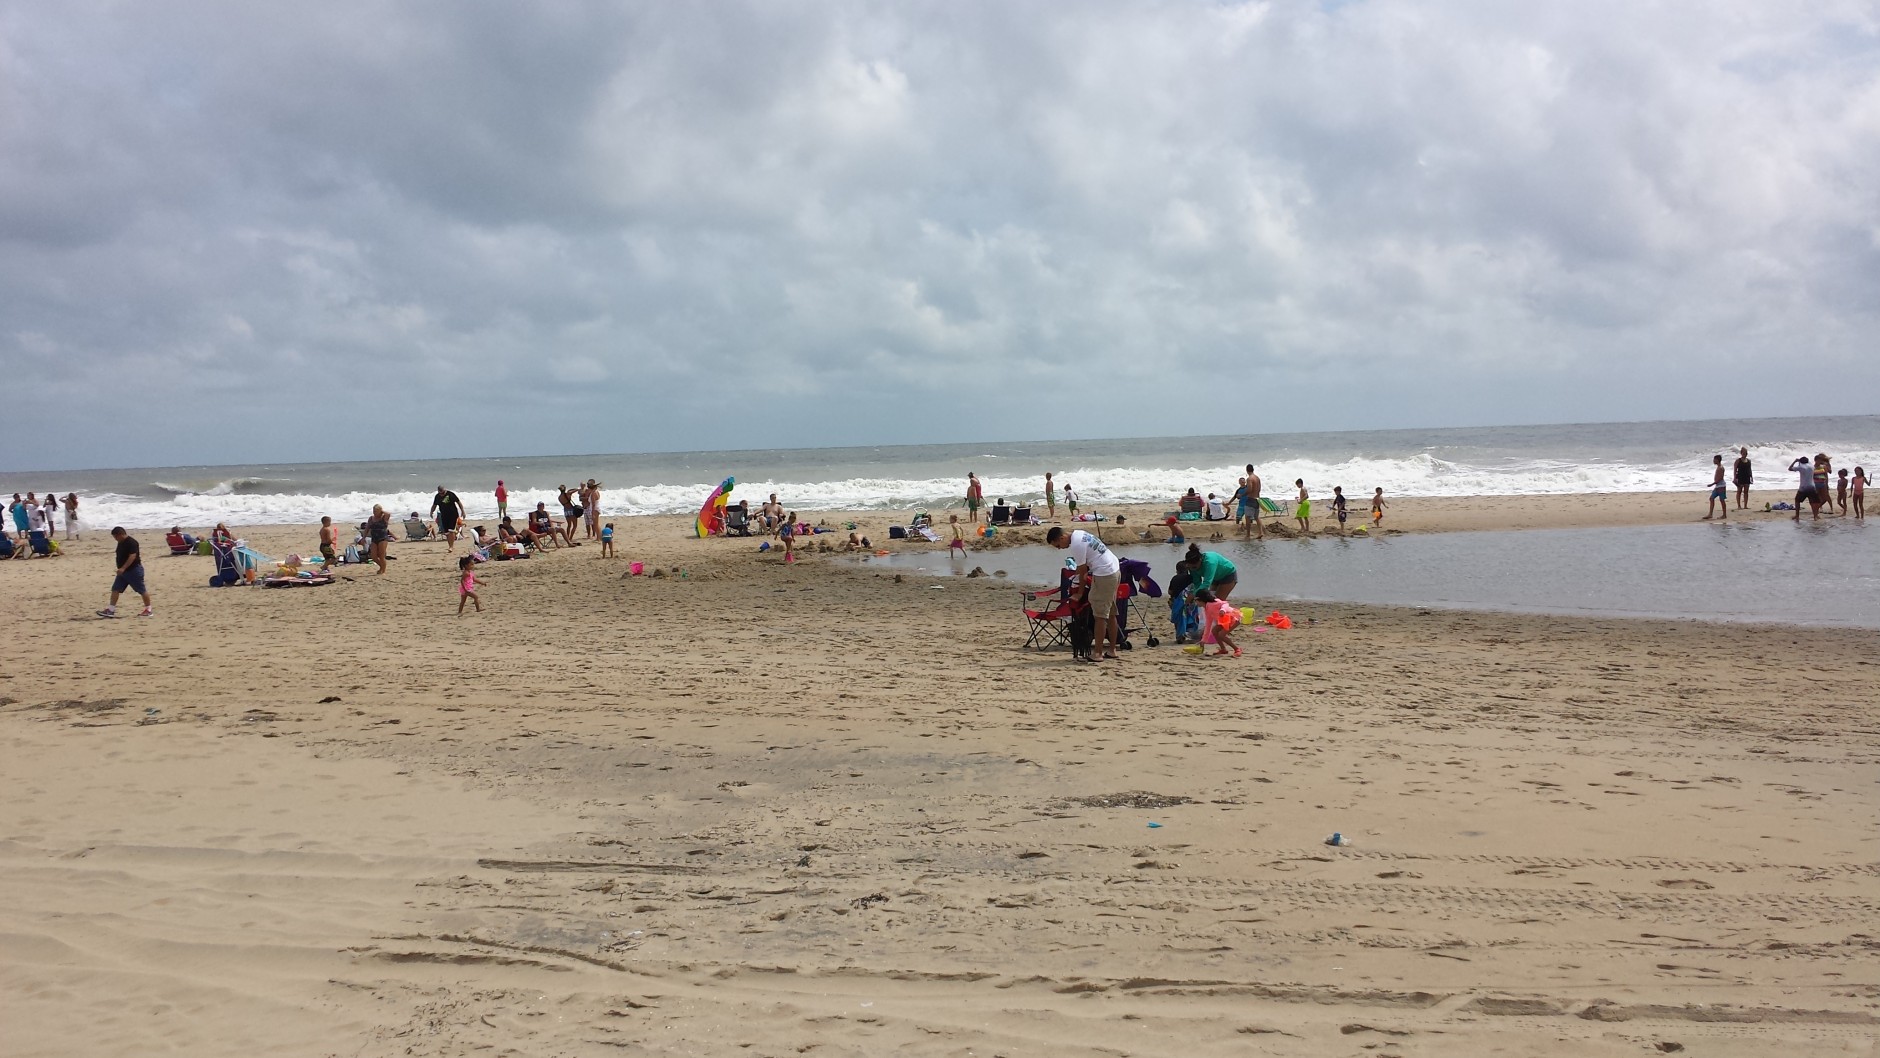 Officials in Ocean city, Md. said damage caused by Hemine was minimal, but swimming was still prohibeted at its beaches on Sunday, Sept. 4, 2016. (WTOP/Colleen Kelleher)